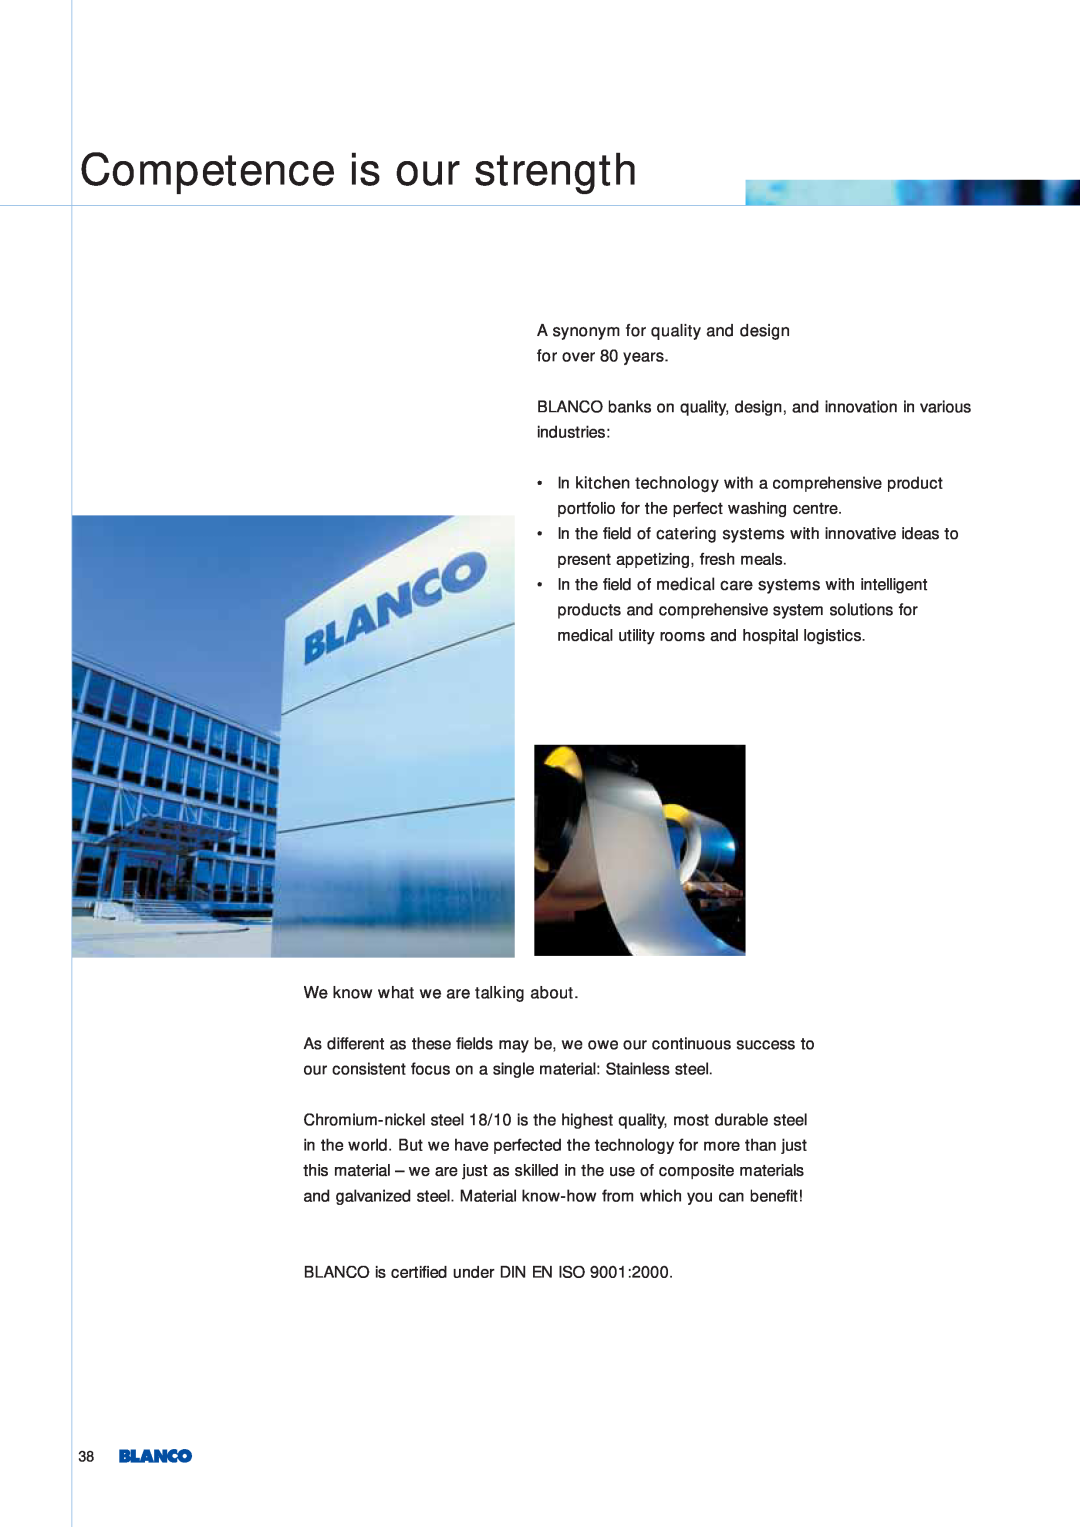 Blanco Tbingen manual Competence is our strength 